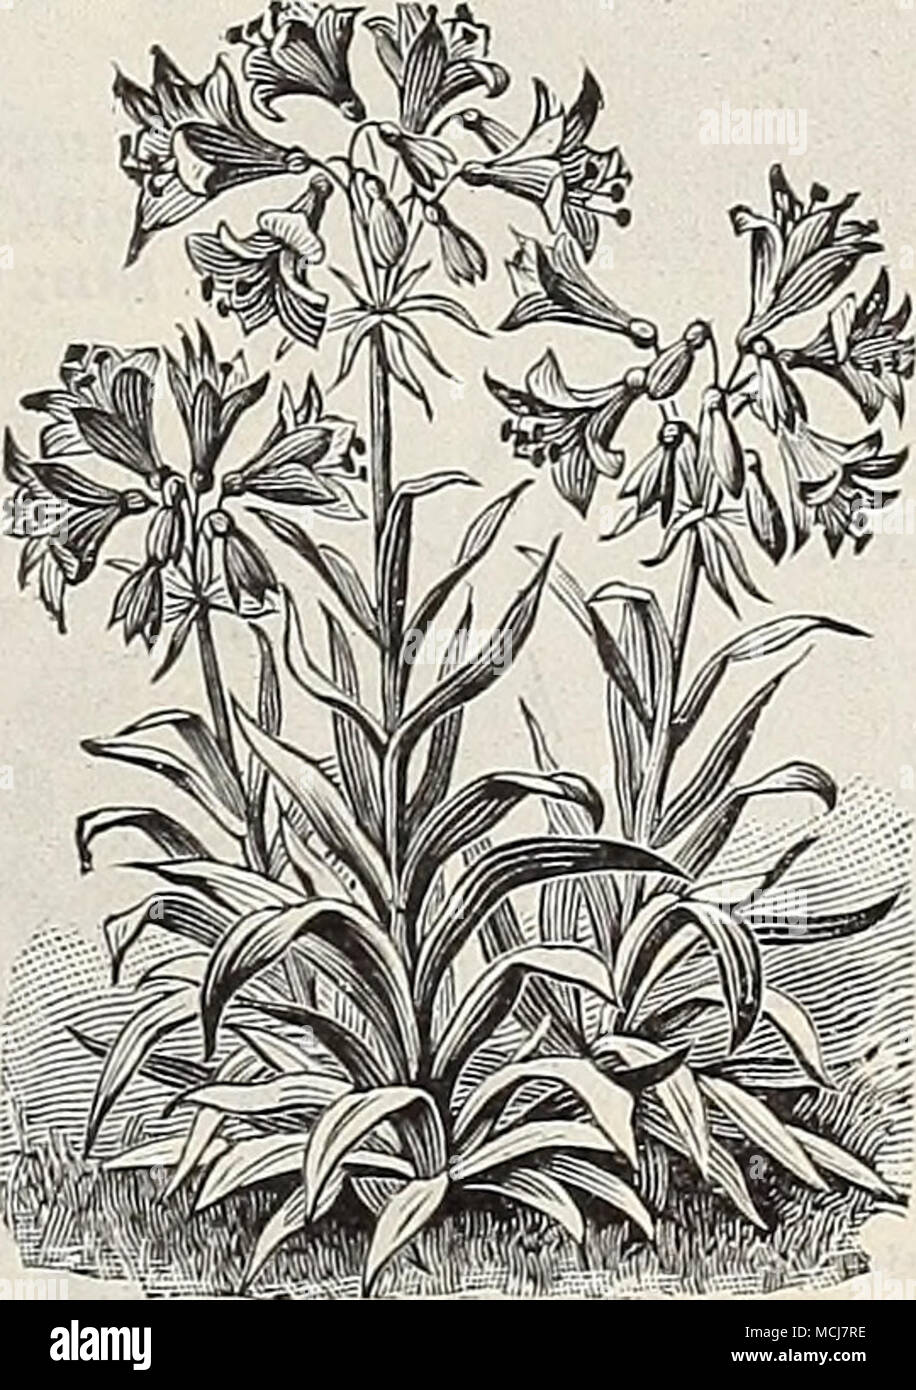 . Alstromeria. lzing. cts. per 100; Â§0.00 per 1000. Azureum. A beautiful variety, throwing up in spring slender stems 2 feet high, surmounted by a large umbel of lovely azure-blue flowers ; perfectly hardy. 6 cts. each ; 60 cts. per doz.; Â§4.50 per 100. PP^J pa ErJv- ift' -V % F^ ji^t'- *-K w â &quot;â j &amp;^i^rf&amp; A- * 'Mil Rj?-&gt; V-V3 Allium Neapolitanum. We make a specialty of May-flowering Tulips. See pages io and n. (19) Stock Photo